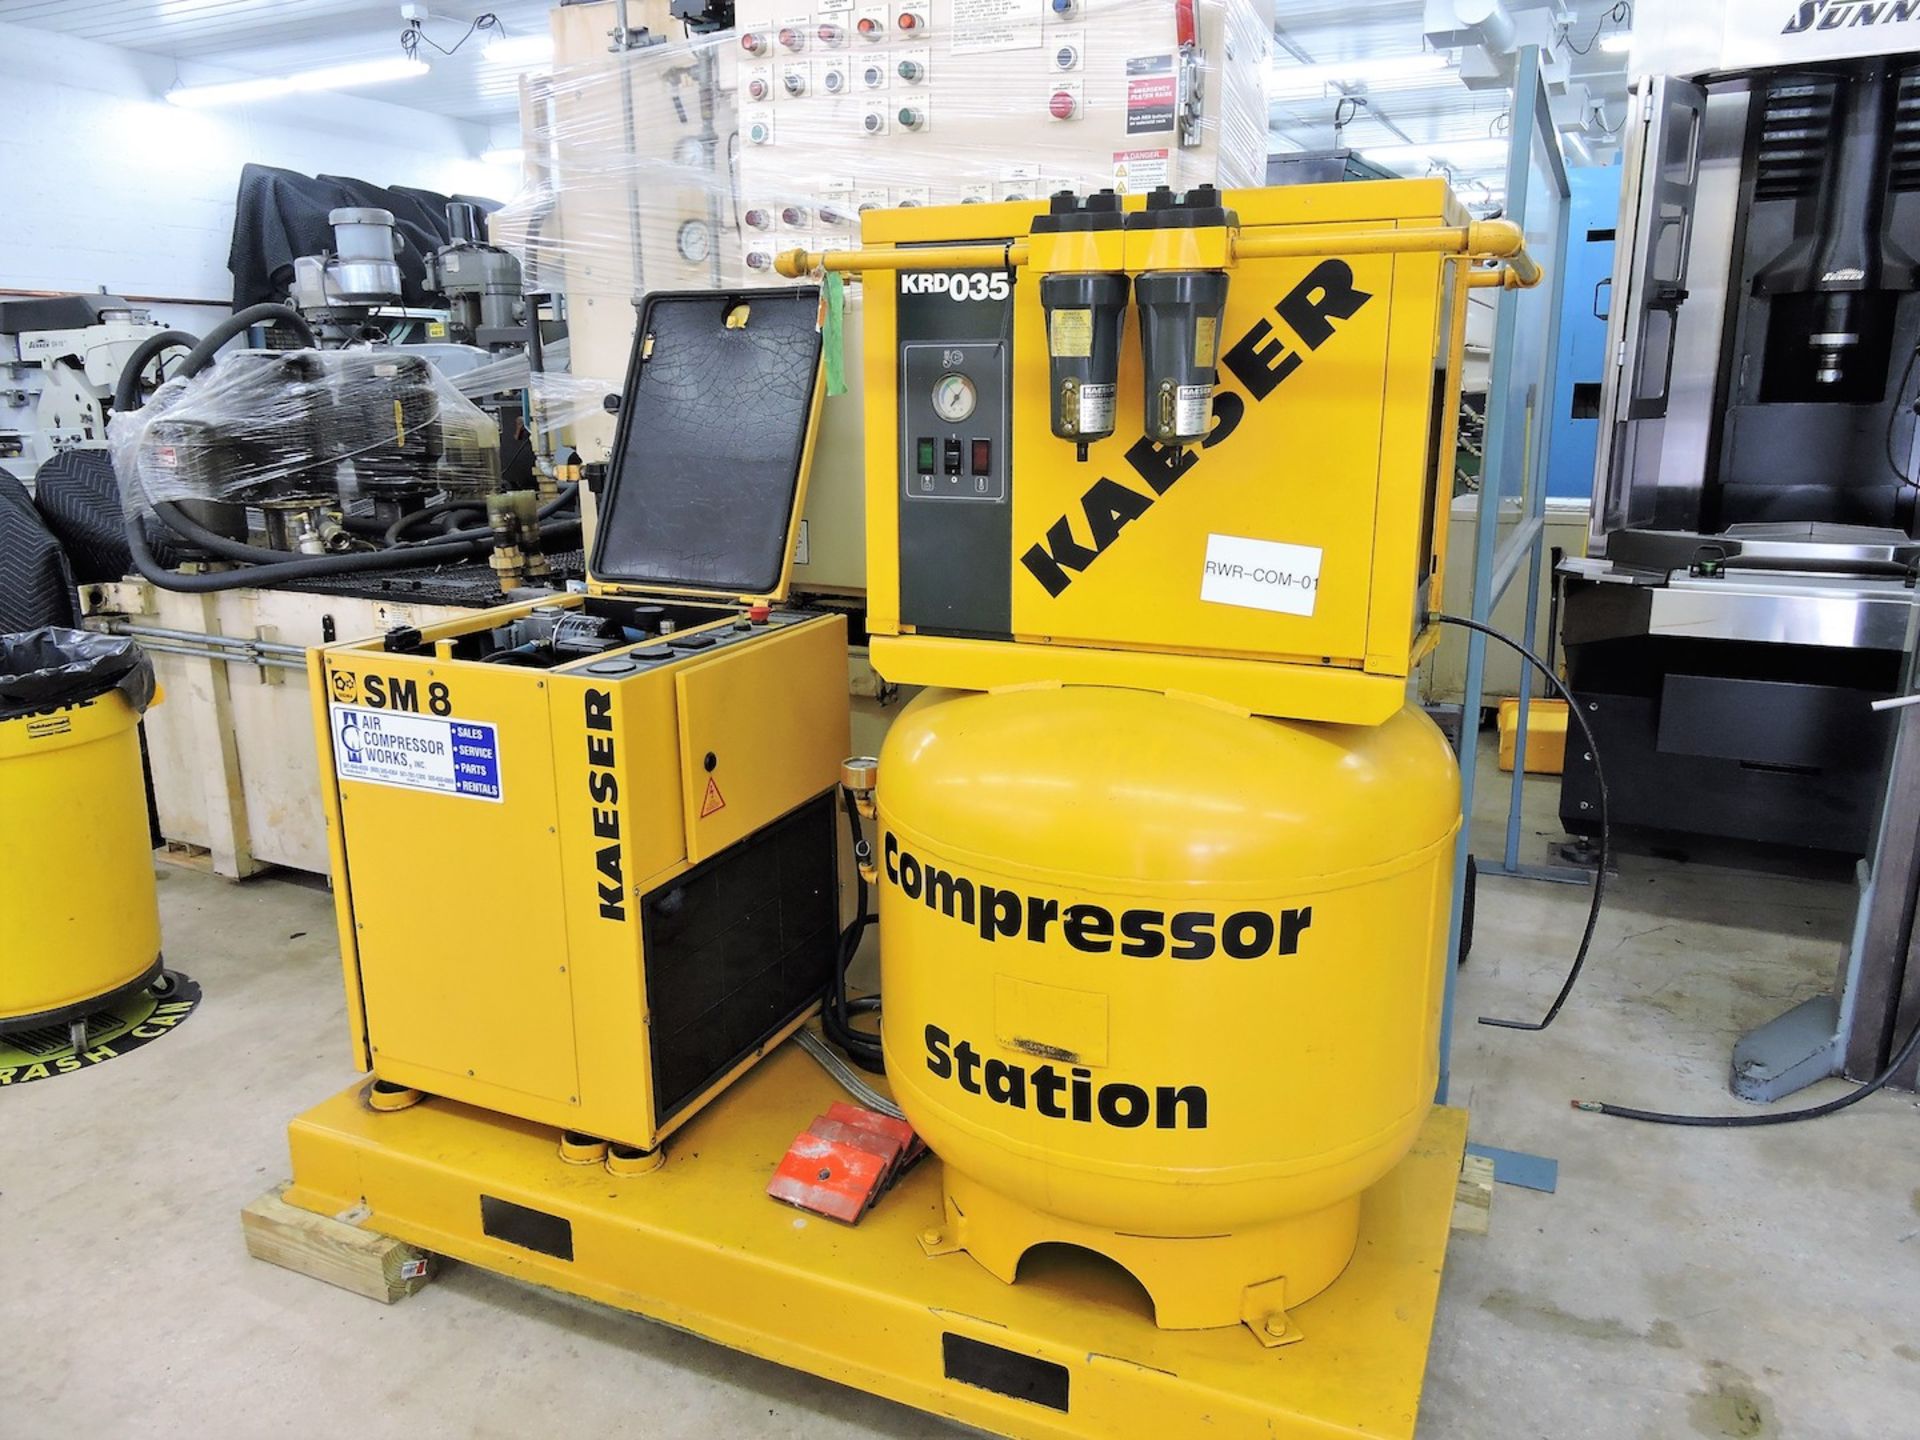 KAESER 7.5 HP ROTARY SCREW AIR COMPRESSOR; SM-8, W/78 CFM @125 PSI; Oil Injected Rotary Screw End; - Image 2 of 6